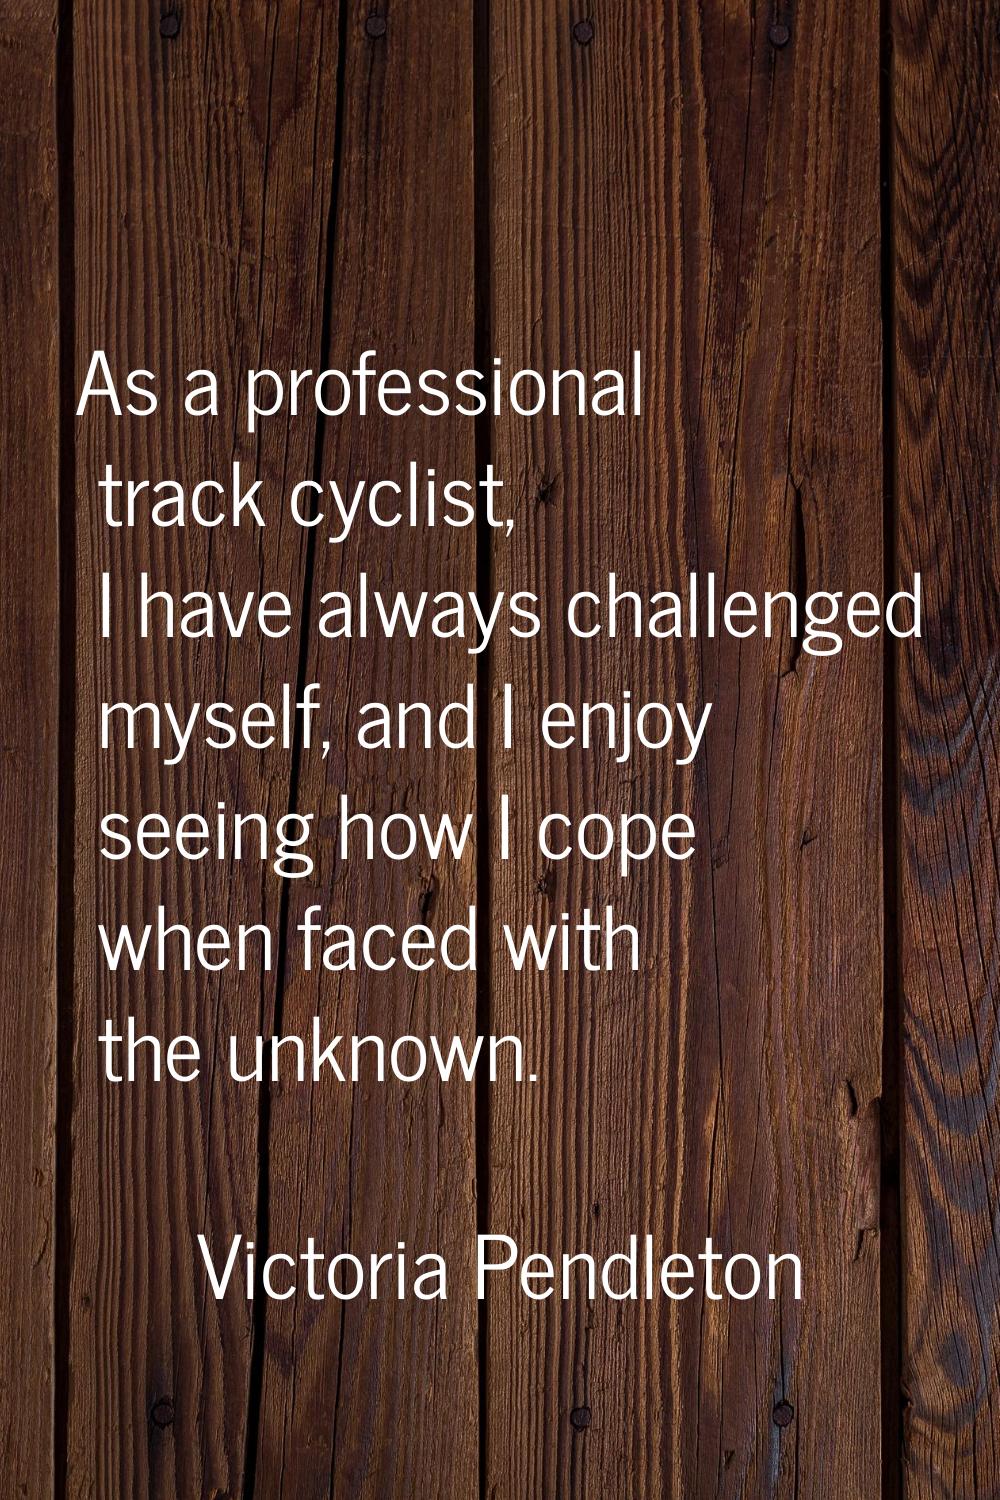 As a professional track cyclist, I have always challenged myself, and I enjoy seeing how I cope whe